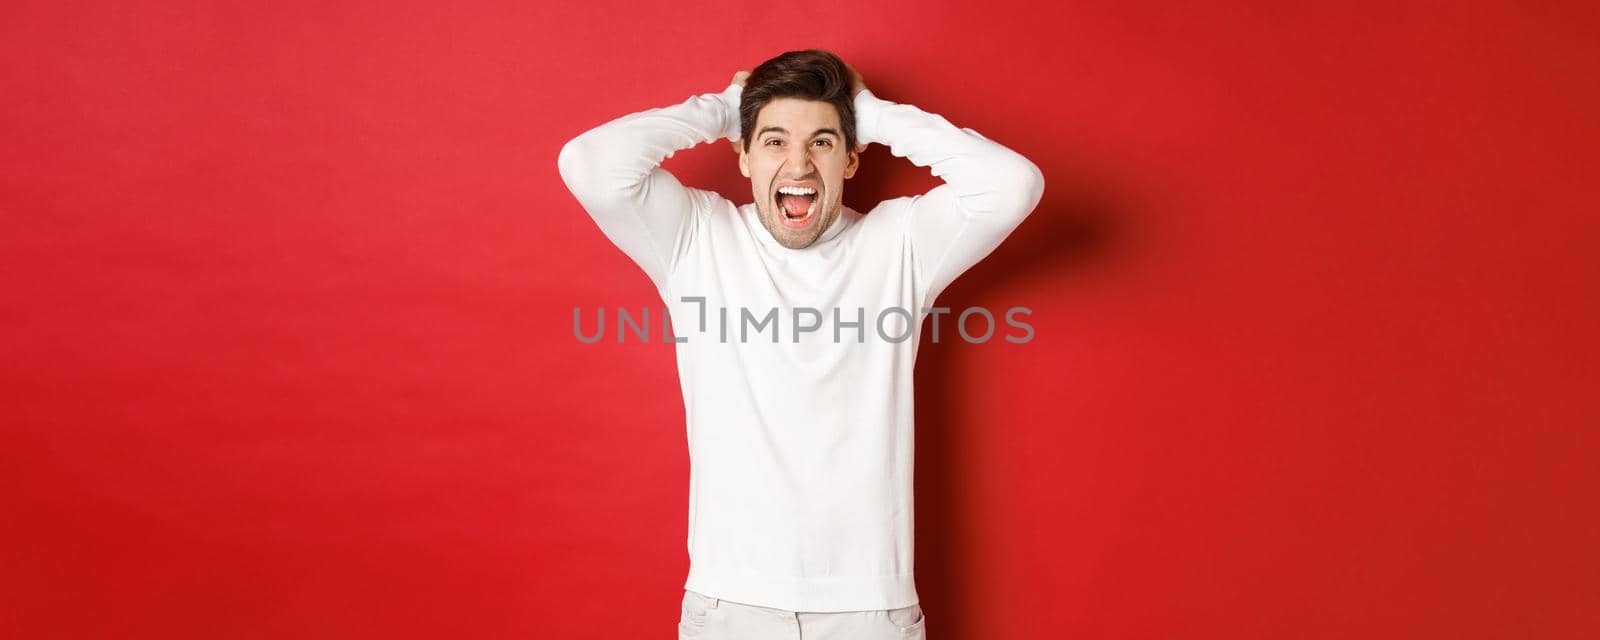 Portrait of frustrated man in white sweater, shouting in anger, holding hands on head and grimacing, feeling distressed, standing over red background.